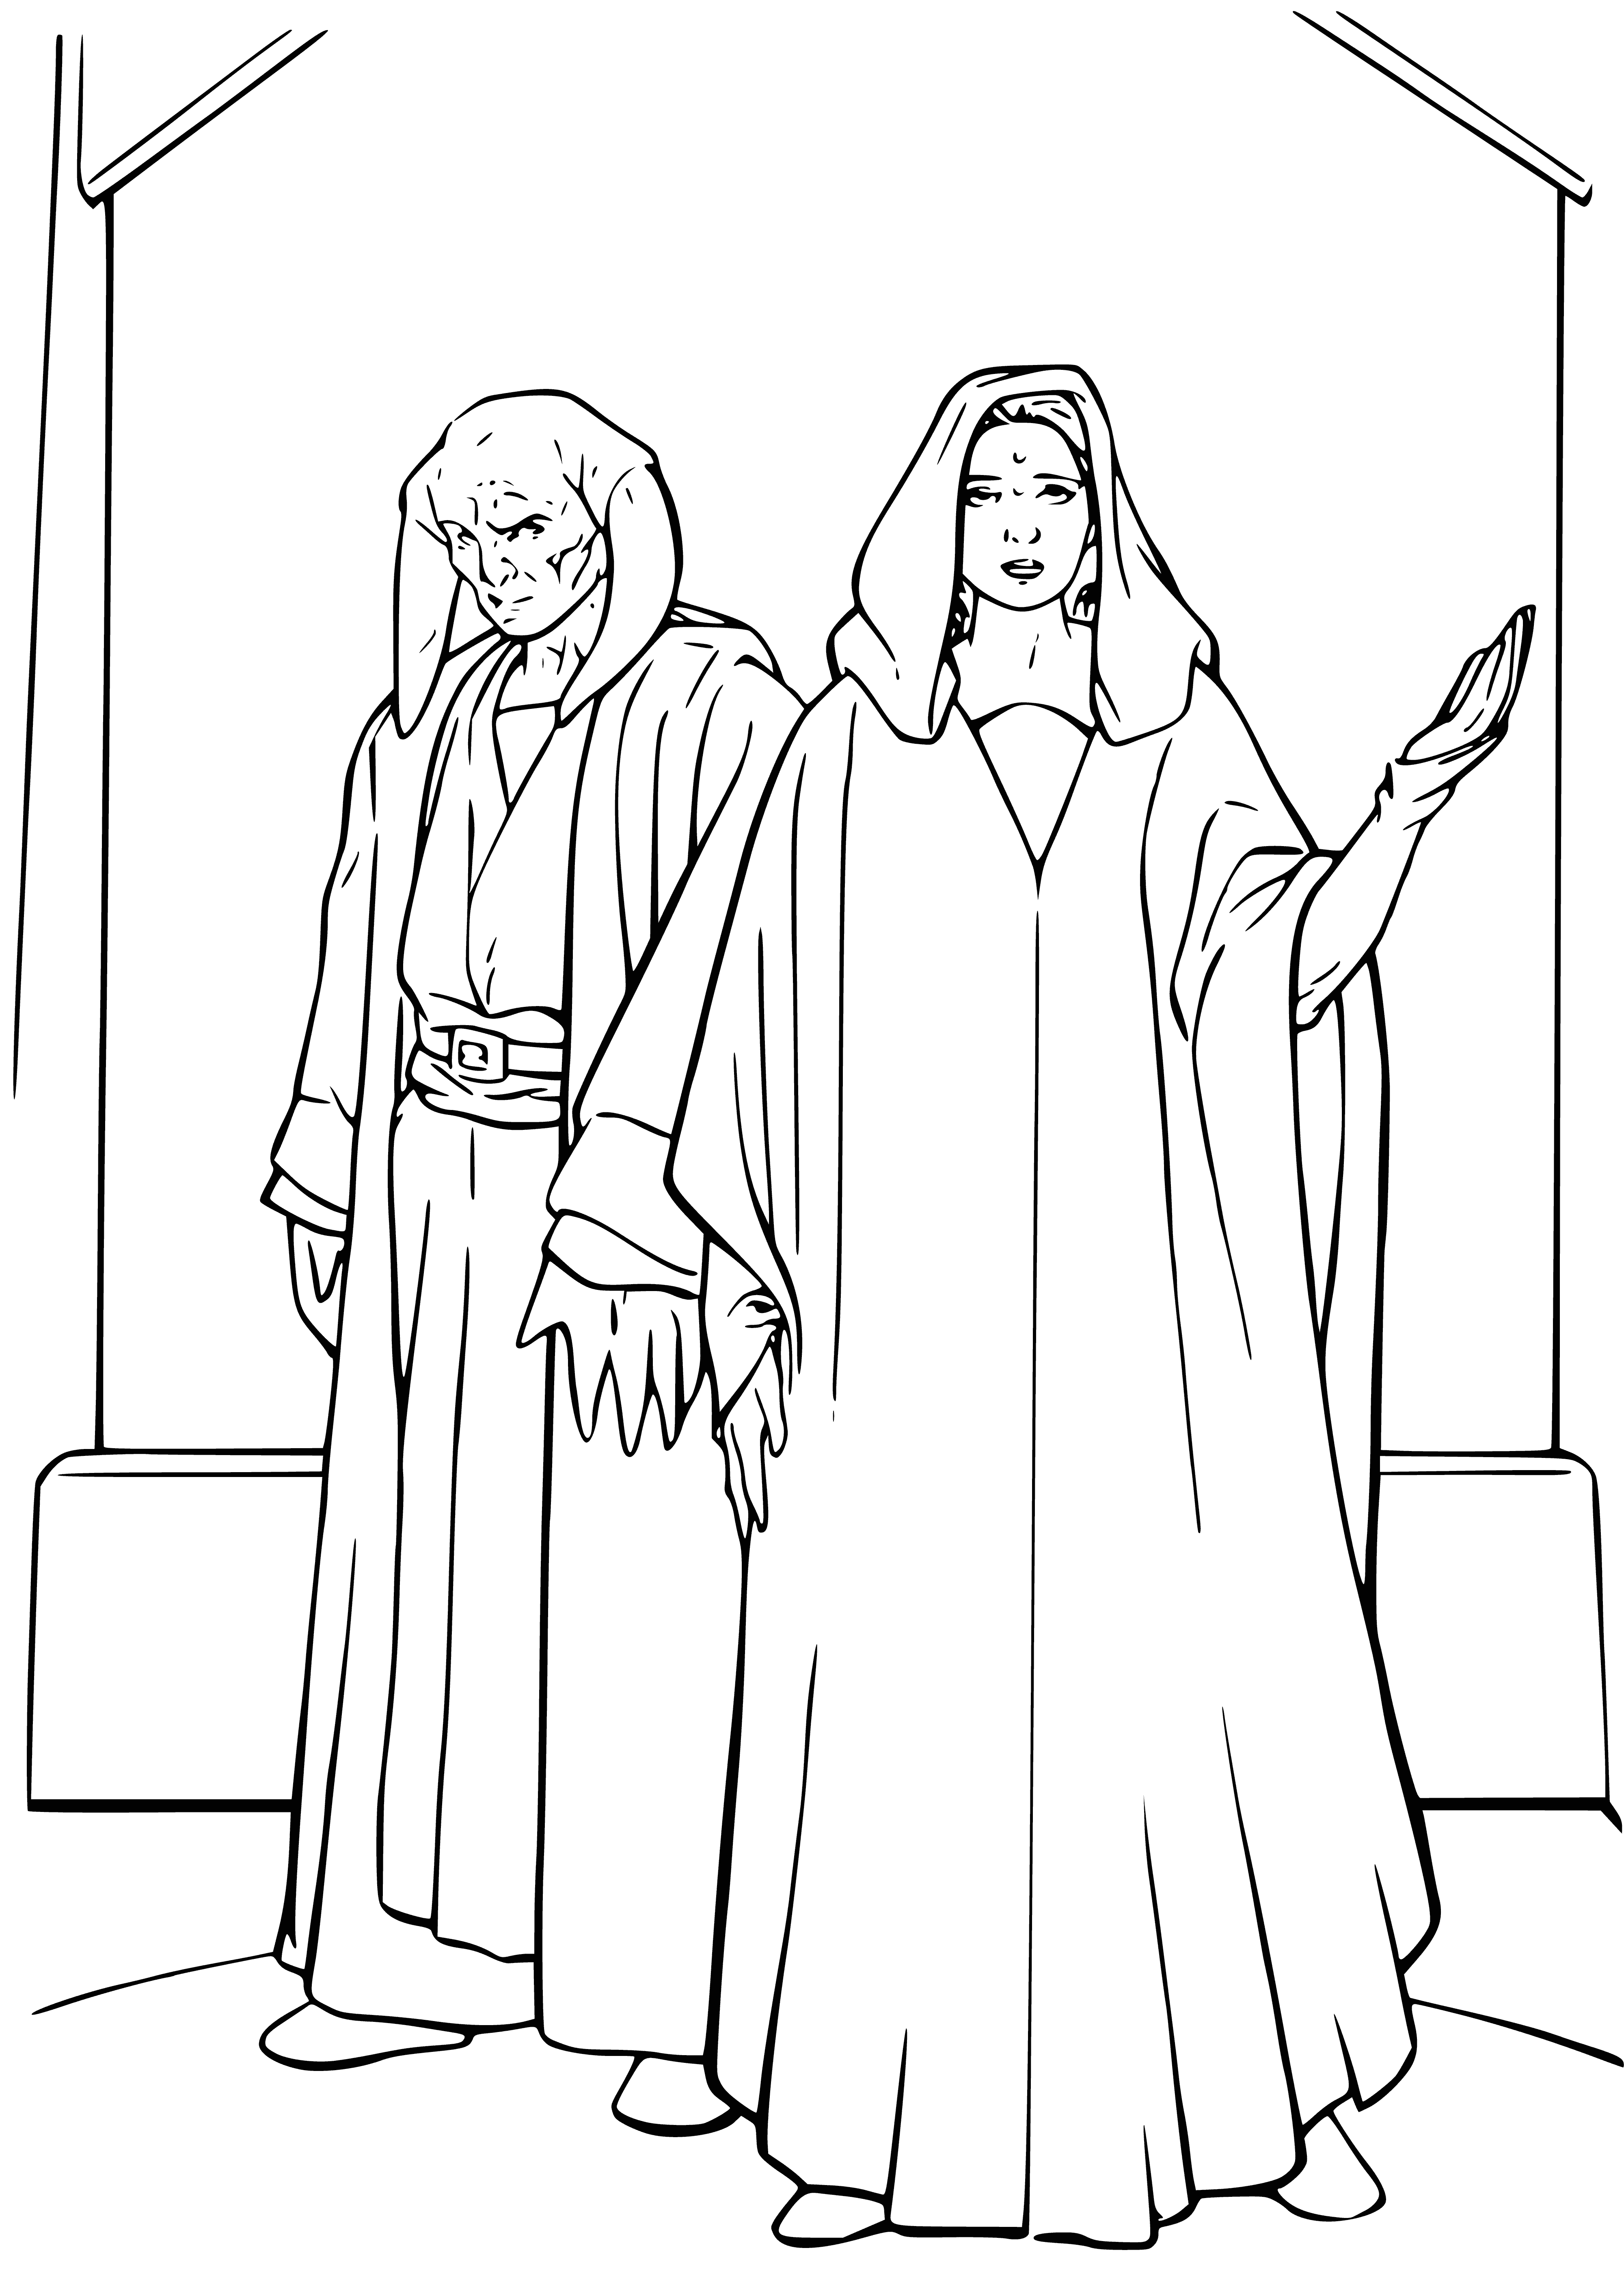 coloring page: Young woman stands in sunlit window with two men; she wears white dress, black scarf. Men wear black, one has beard.